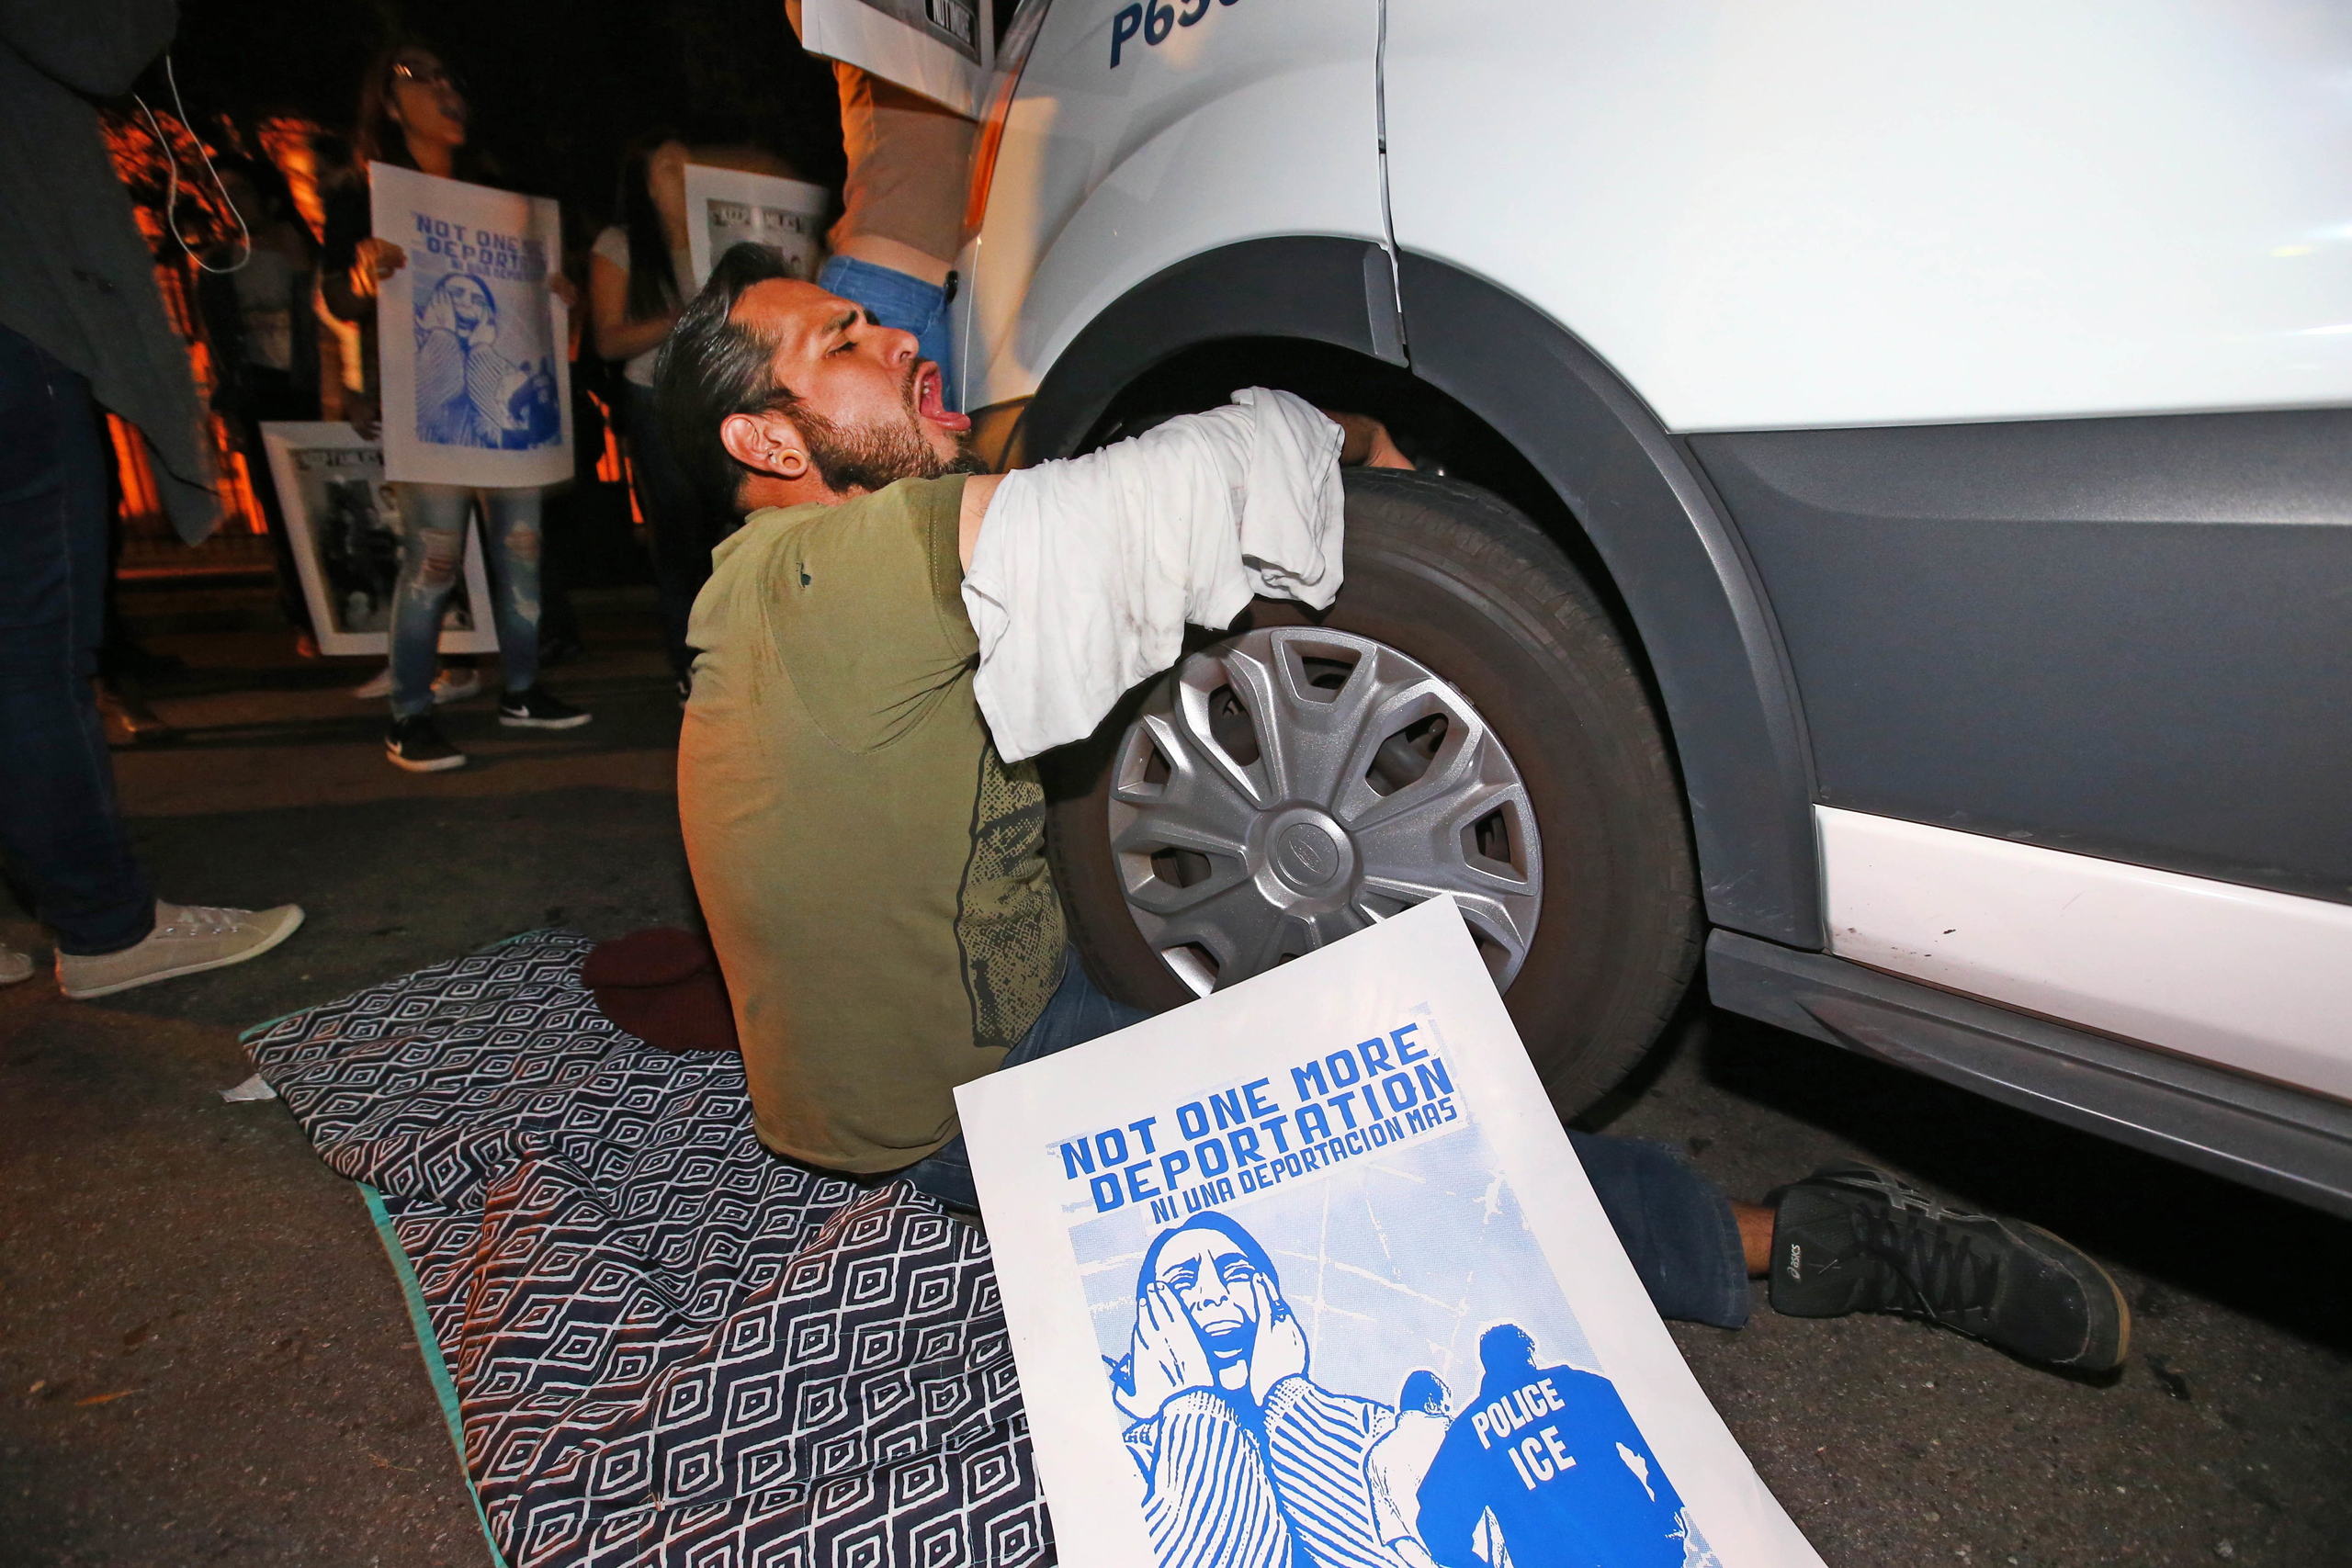 A protester locked himself to the van carrying Guadalupe Garcia de Rayos that is stopped by protesters outside the Immigration and Customs Enforcement facility, in Phoenix on Feb. 8, 2017. (Rob Schumacher—The Arizona Republic/AP)